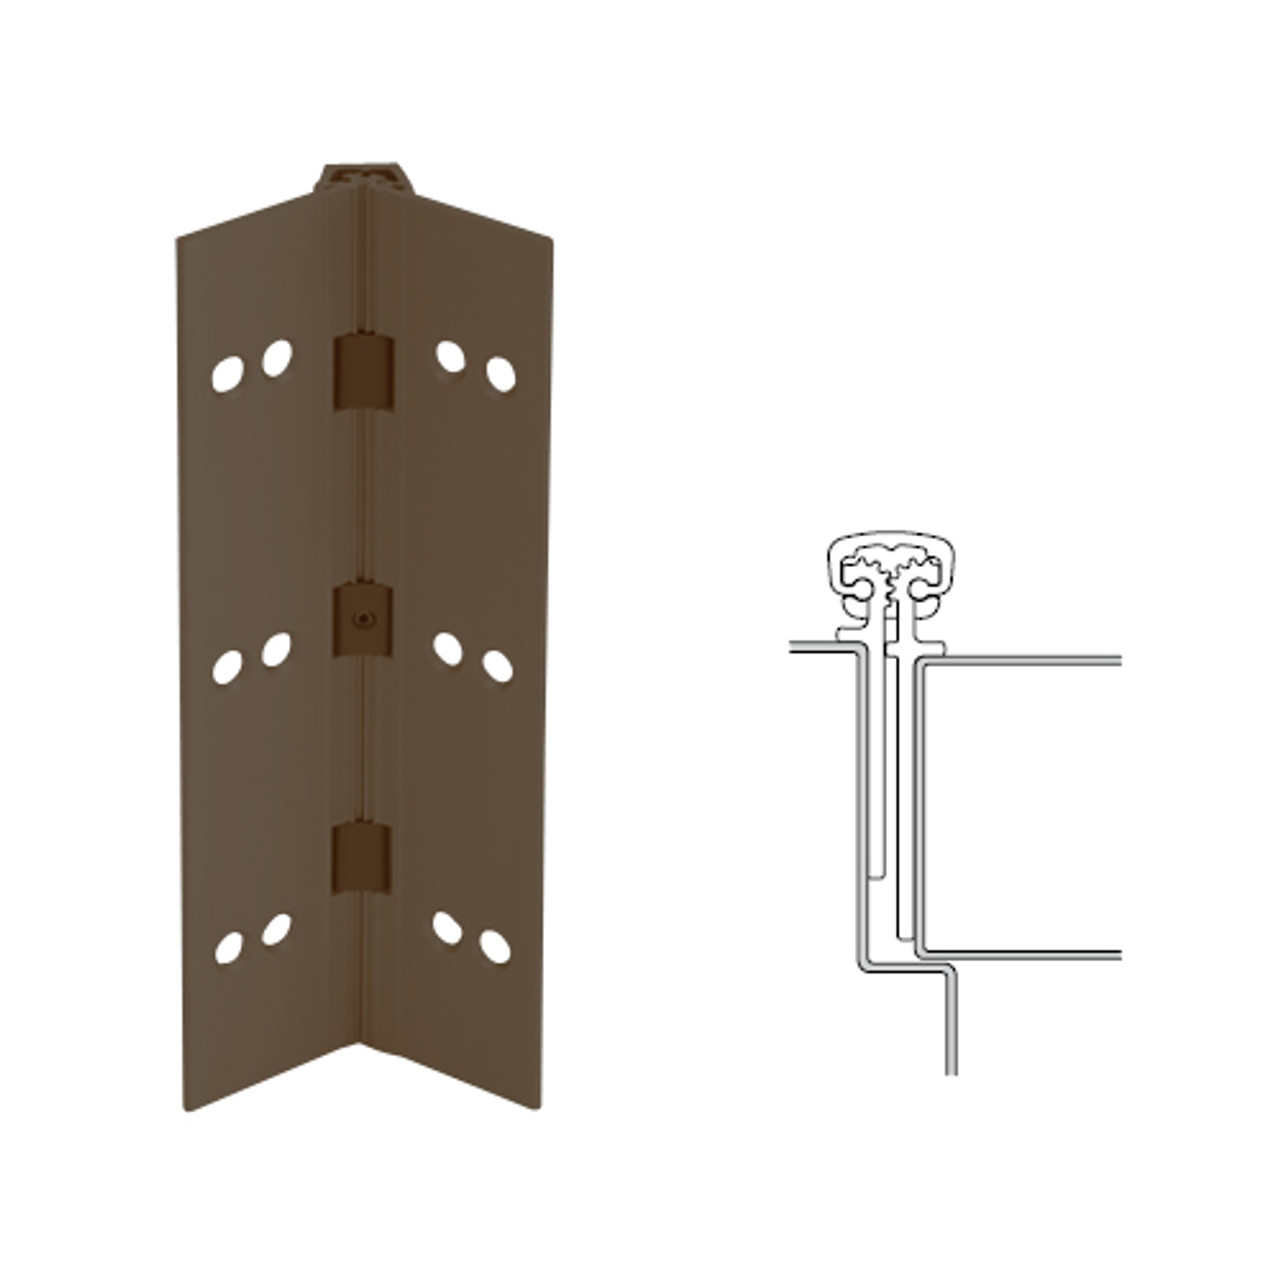 026XY-313AN-95-EPT IVES Full Mortise Continuous Geared Hinges with Electrical Power Transfer Prep in Dark Bronze Anodized